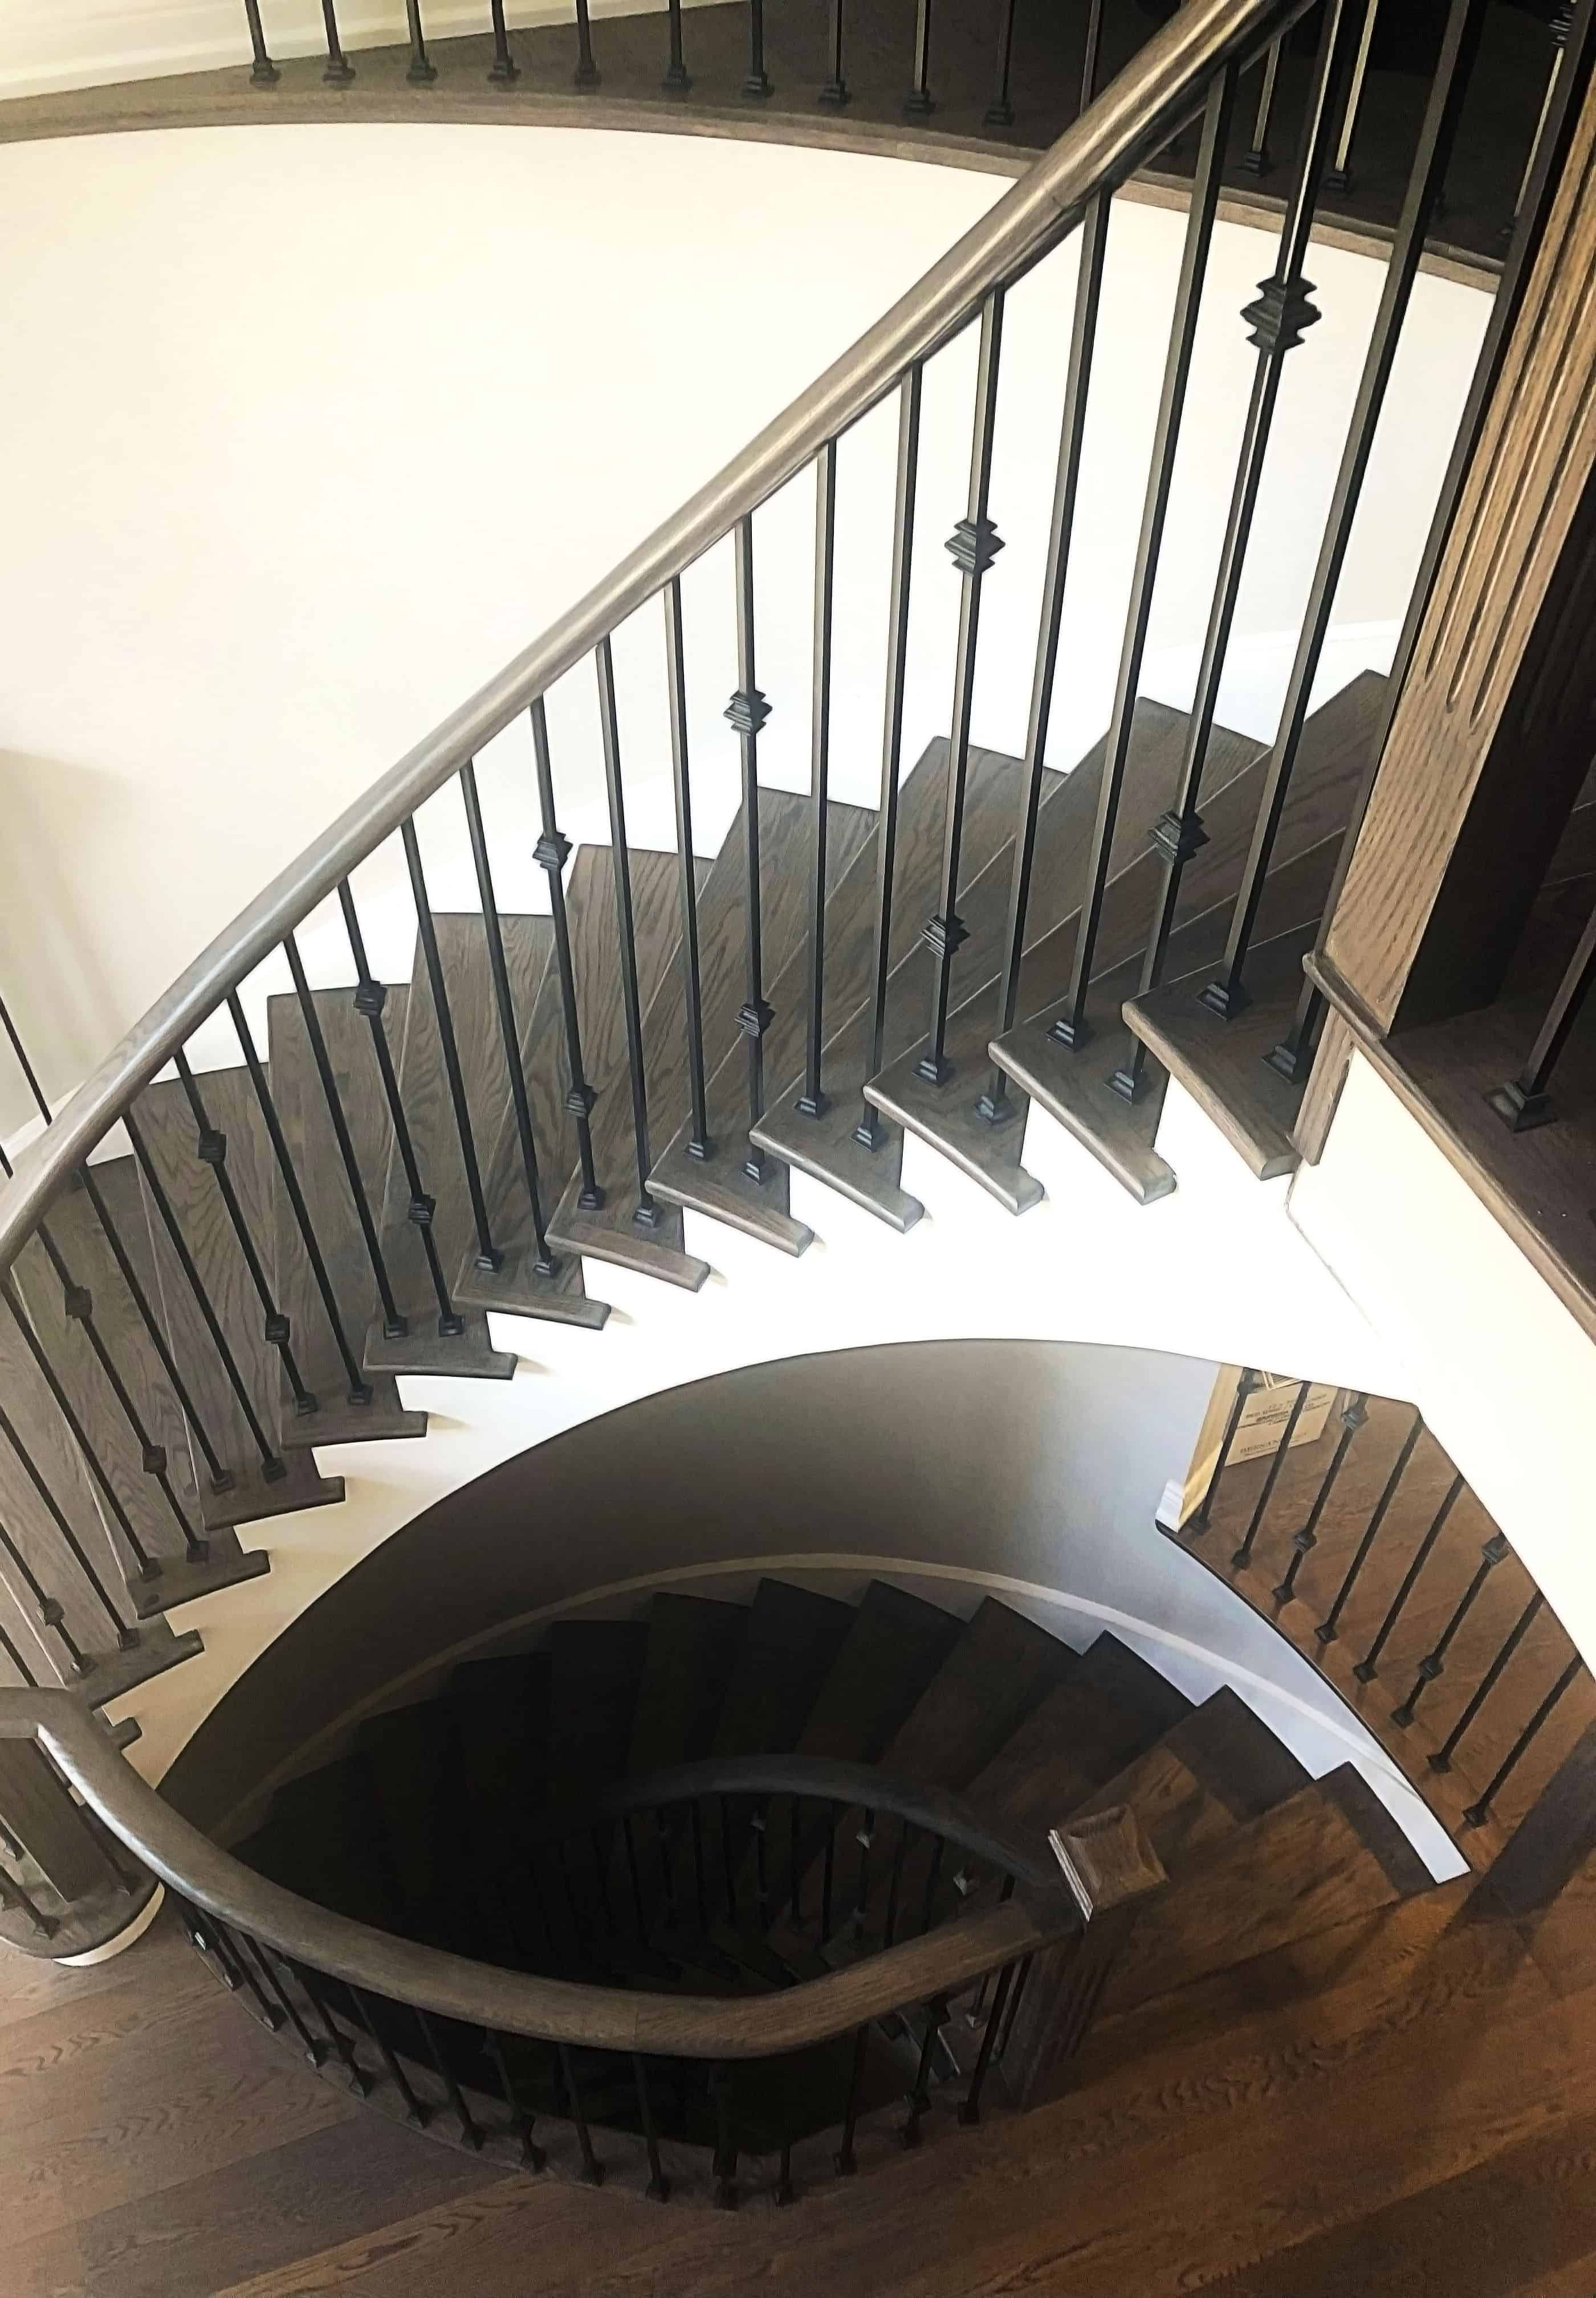 Atera Construction installs beautiful spiral staircaises for a classic feel